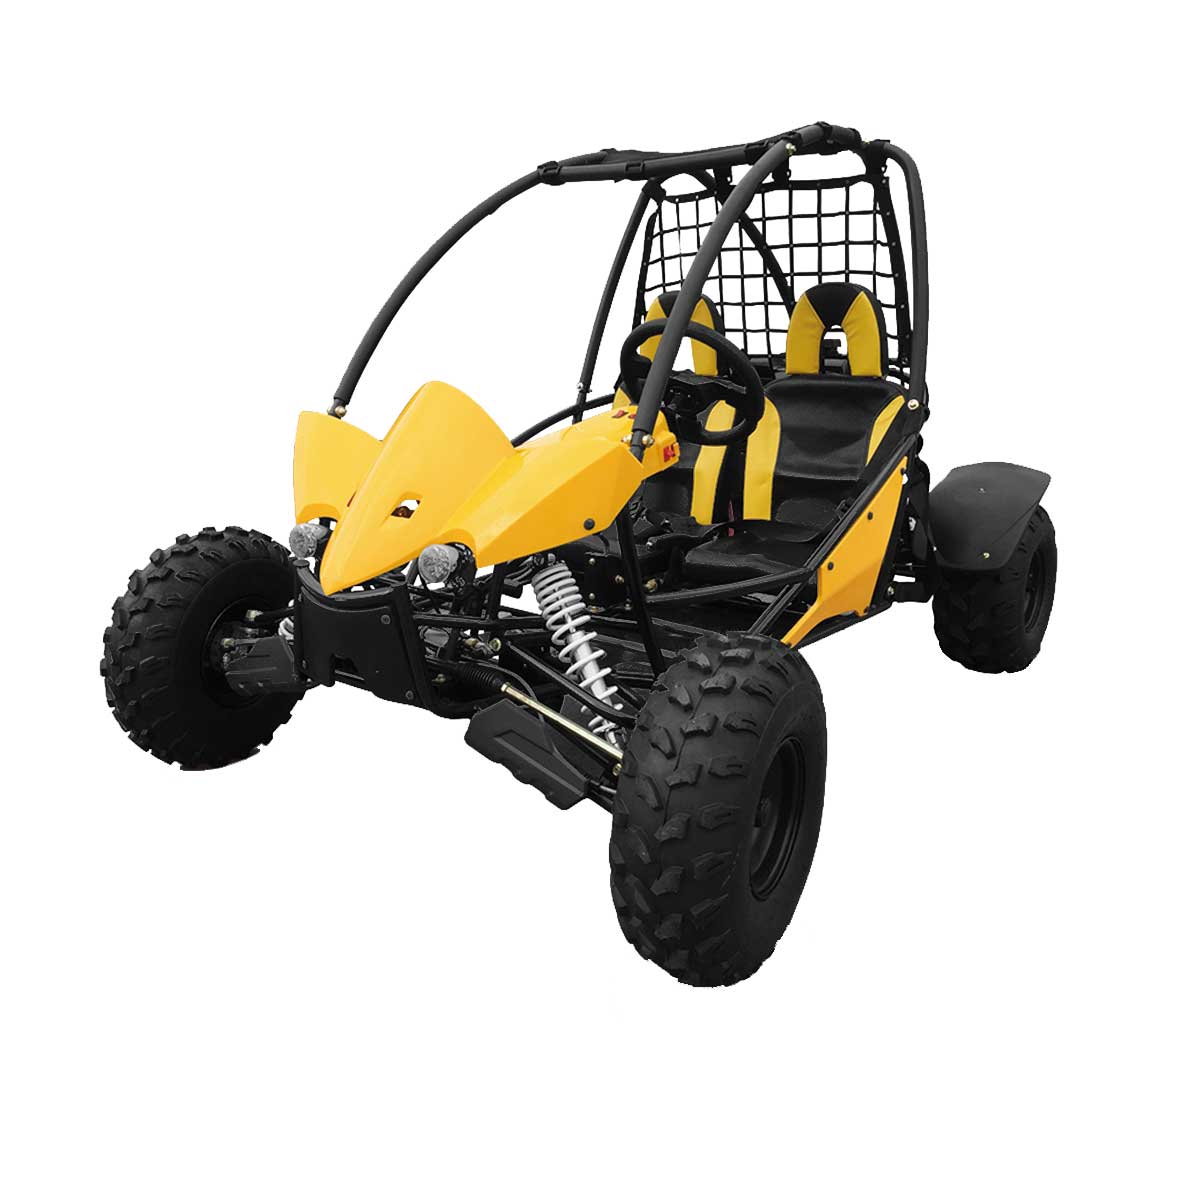 two seater off road buggy